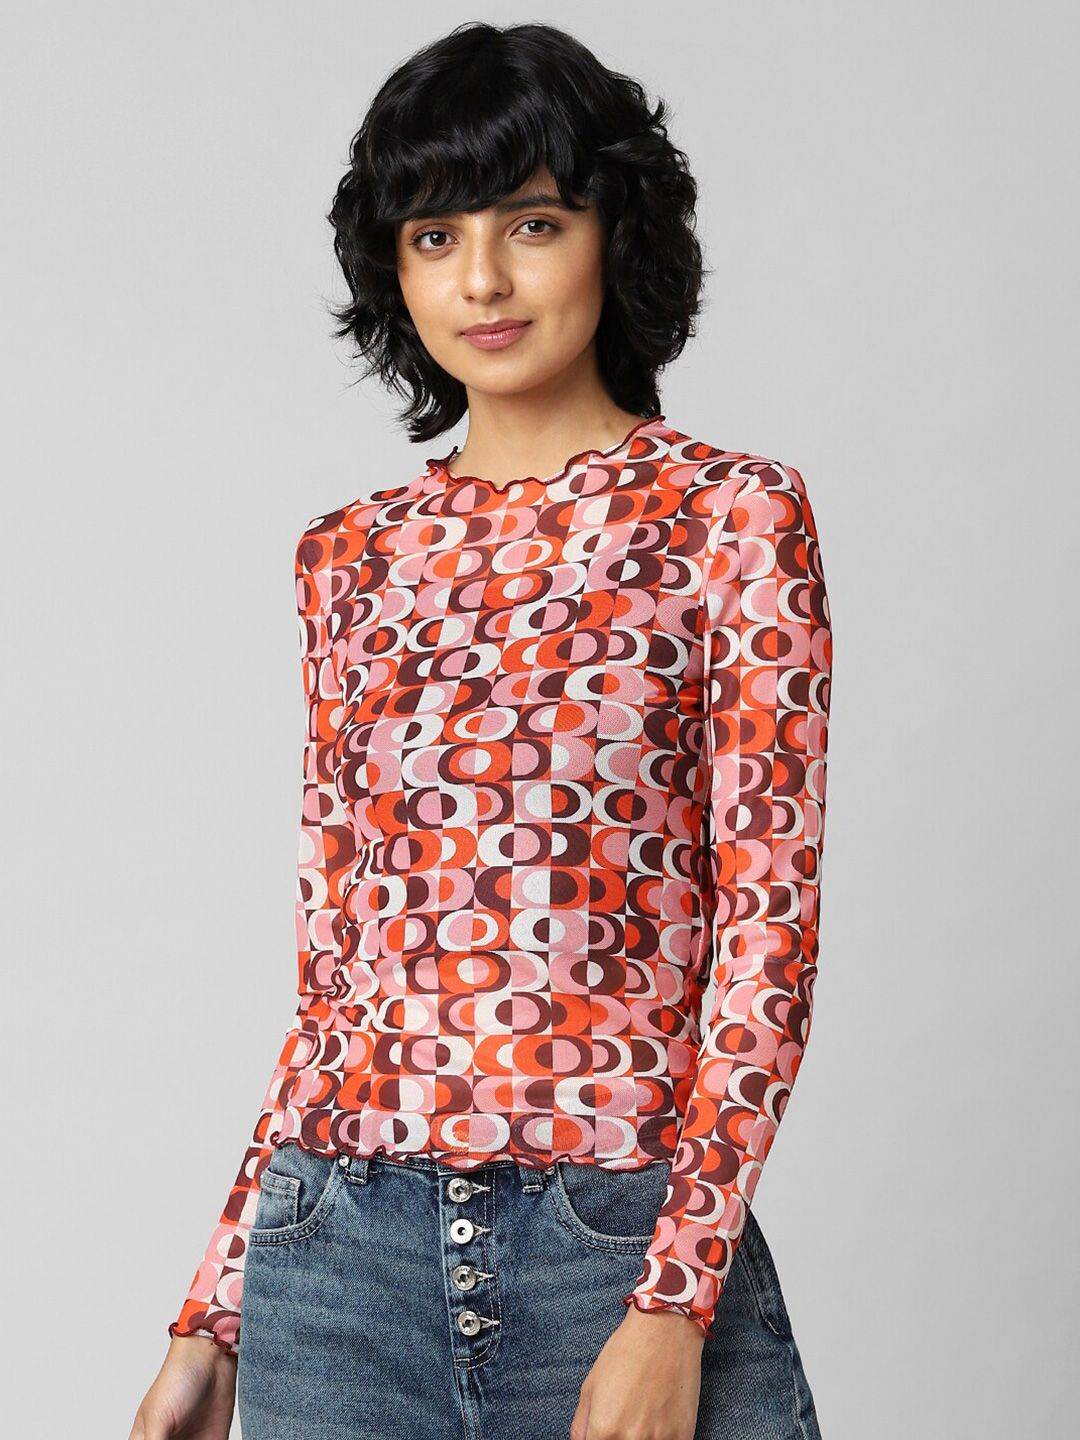 ONLY Women Geometric Printed Top Price in India